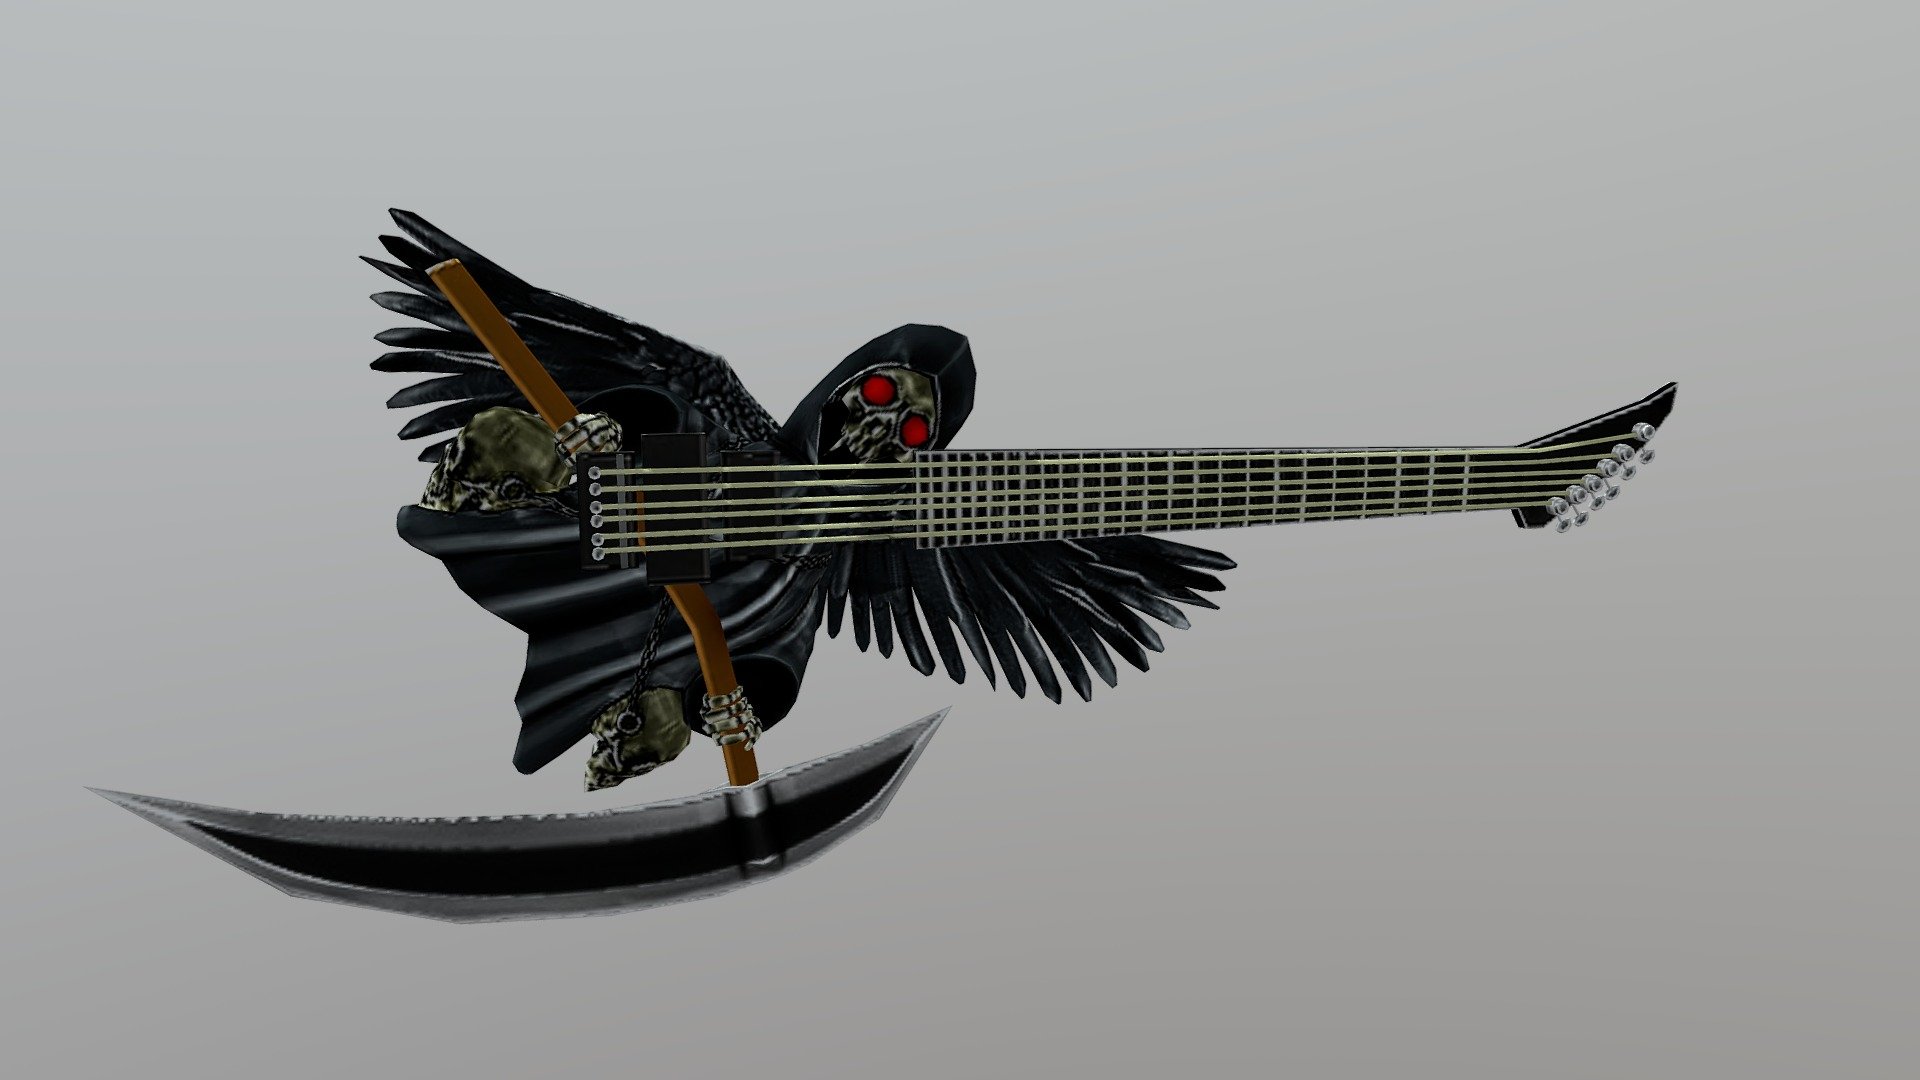 Introducing the &ldquo;Death Angel Guitar